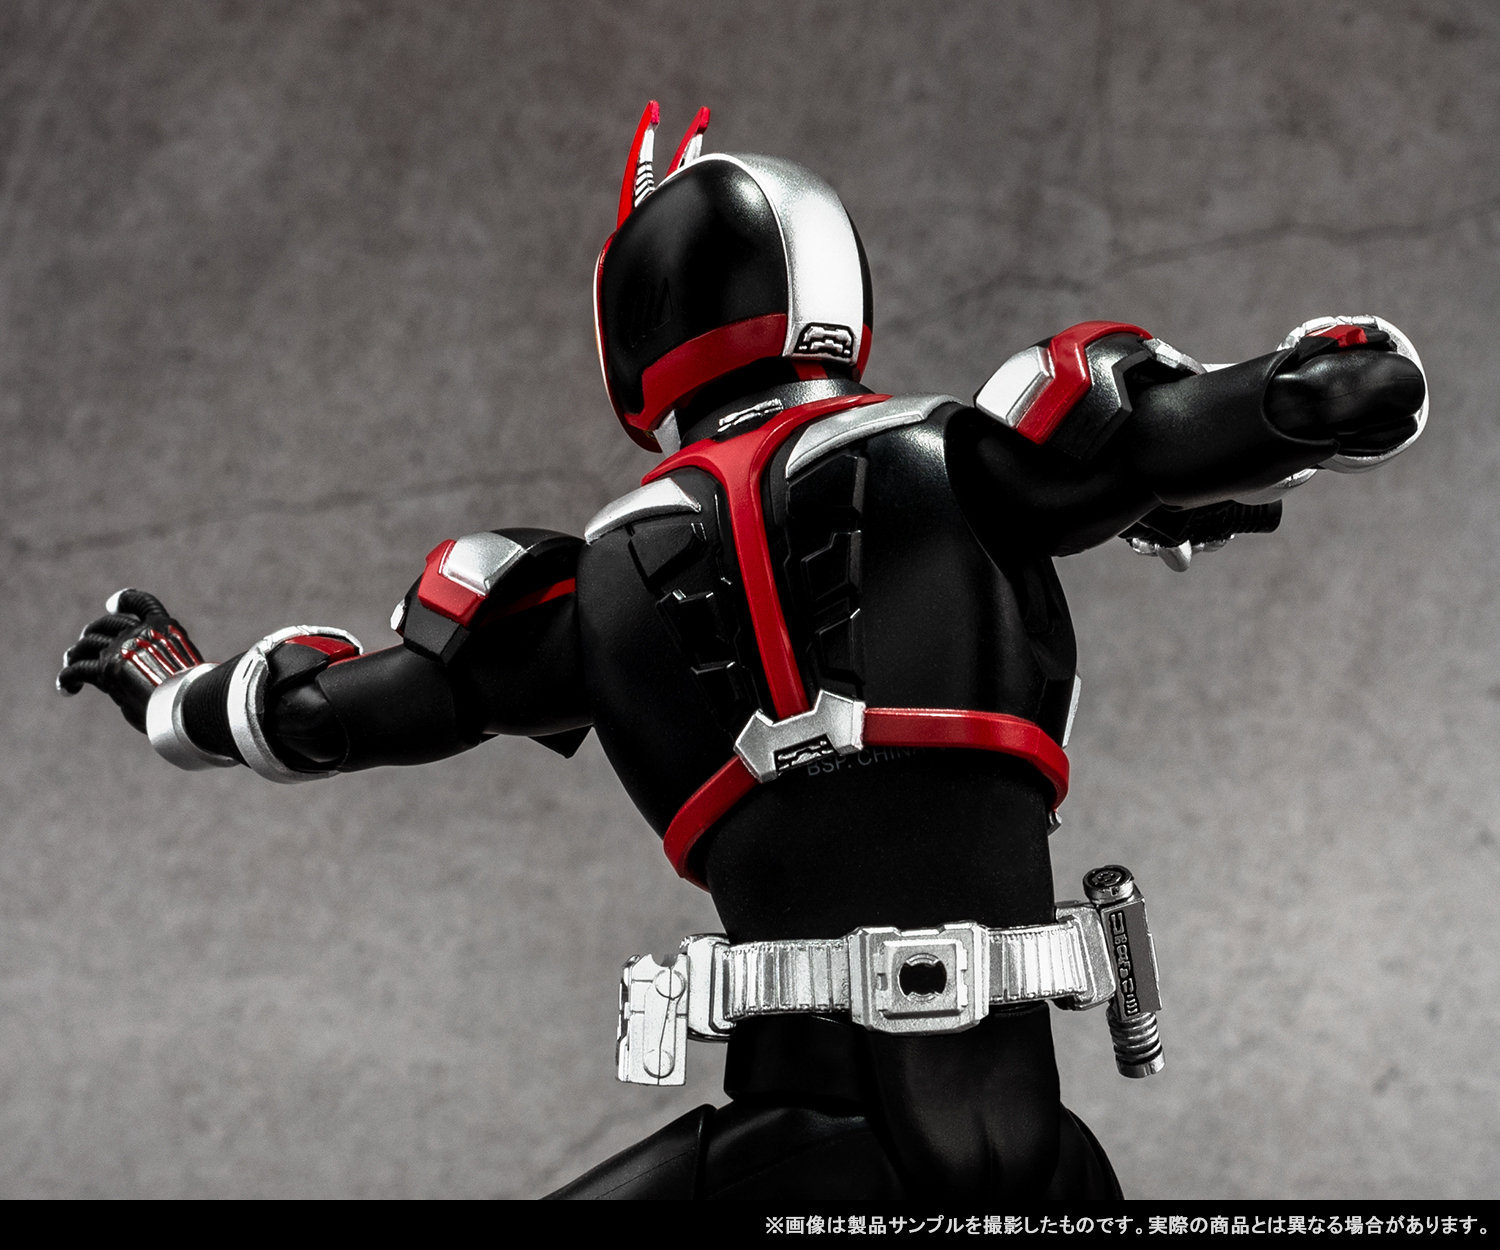 STANDING BY COMPLETE――8月26日発売予定「S.H.Figuarts（真骨彫製法） 仮面ライダーファイズ」製品サンプル紹介